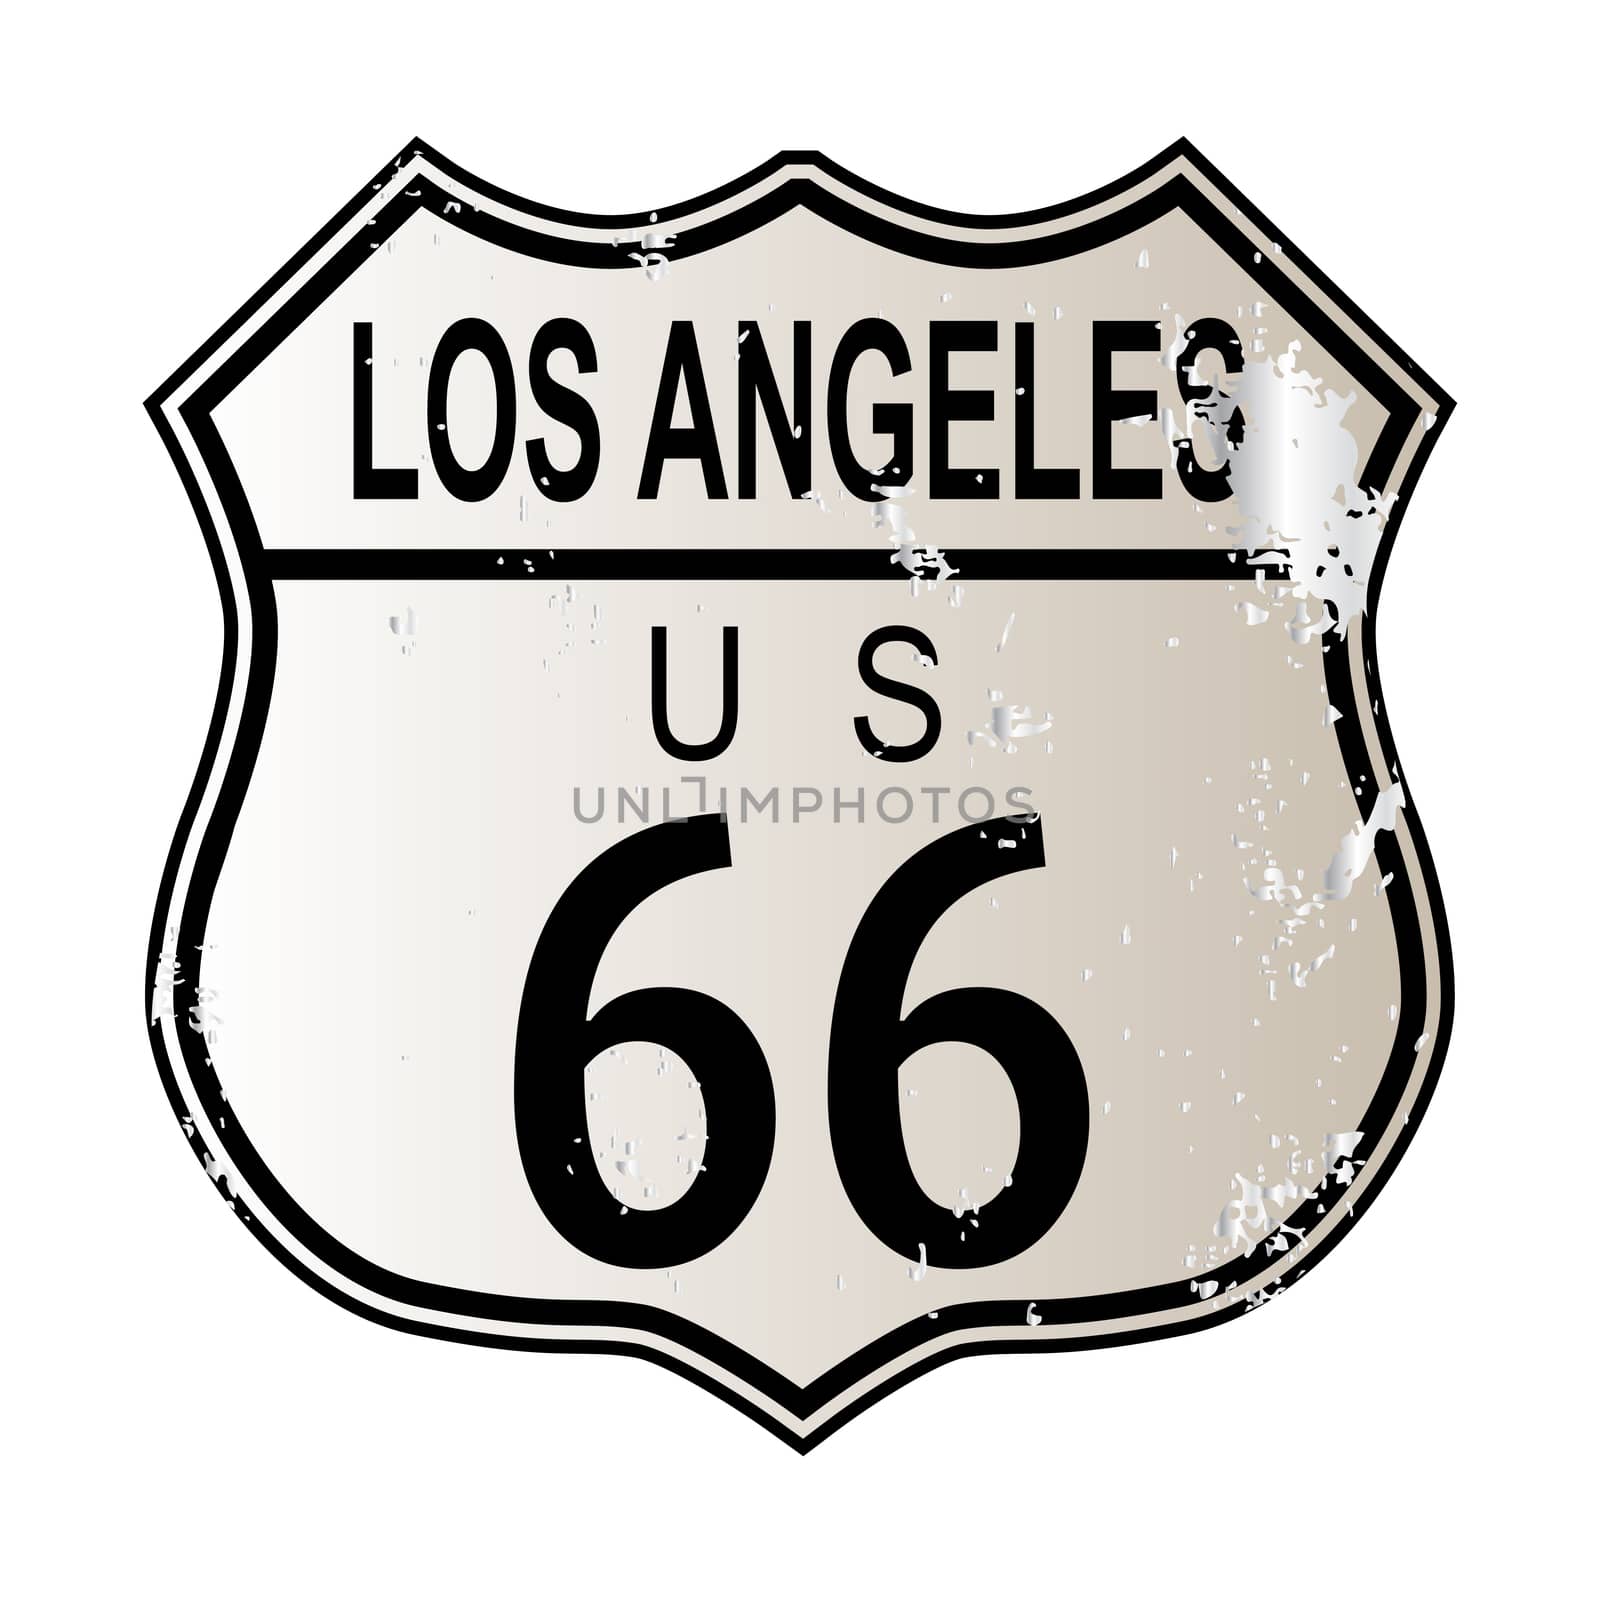 Los Angeles Route 66 Sign by Bigalbaloo